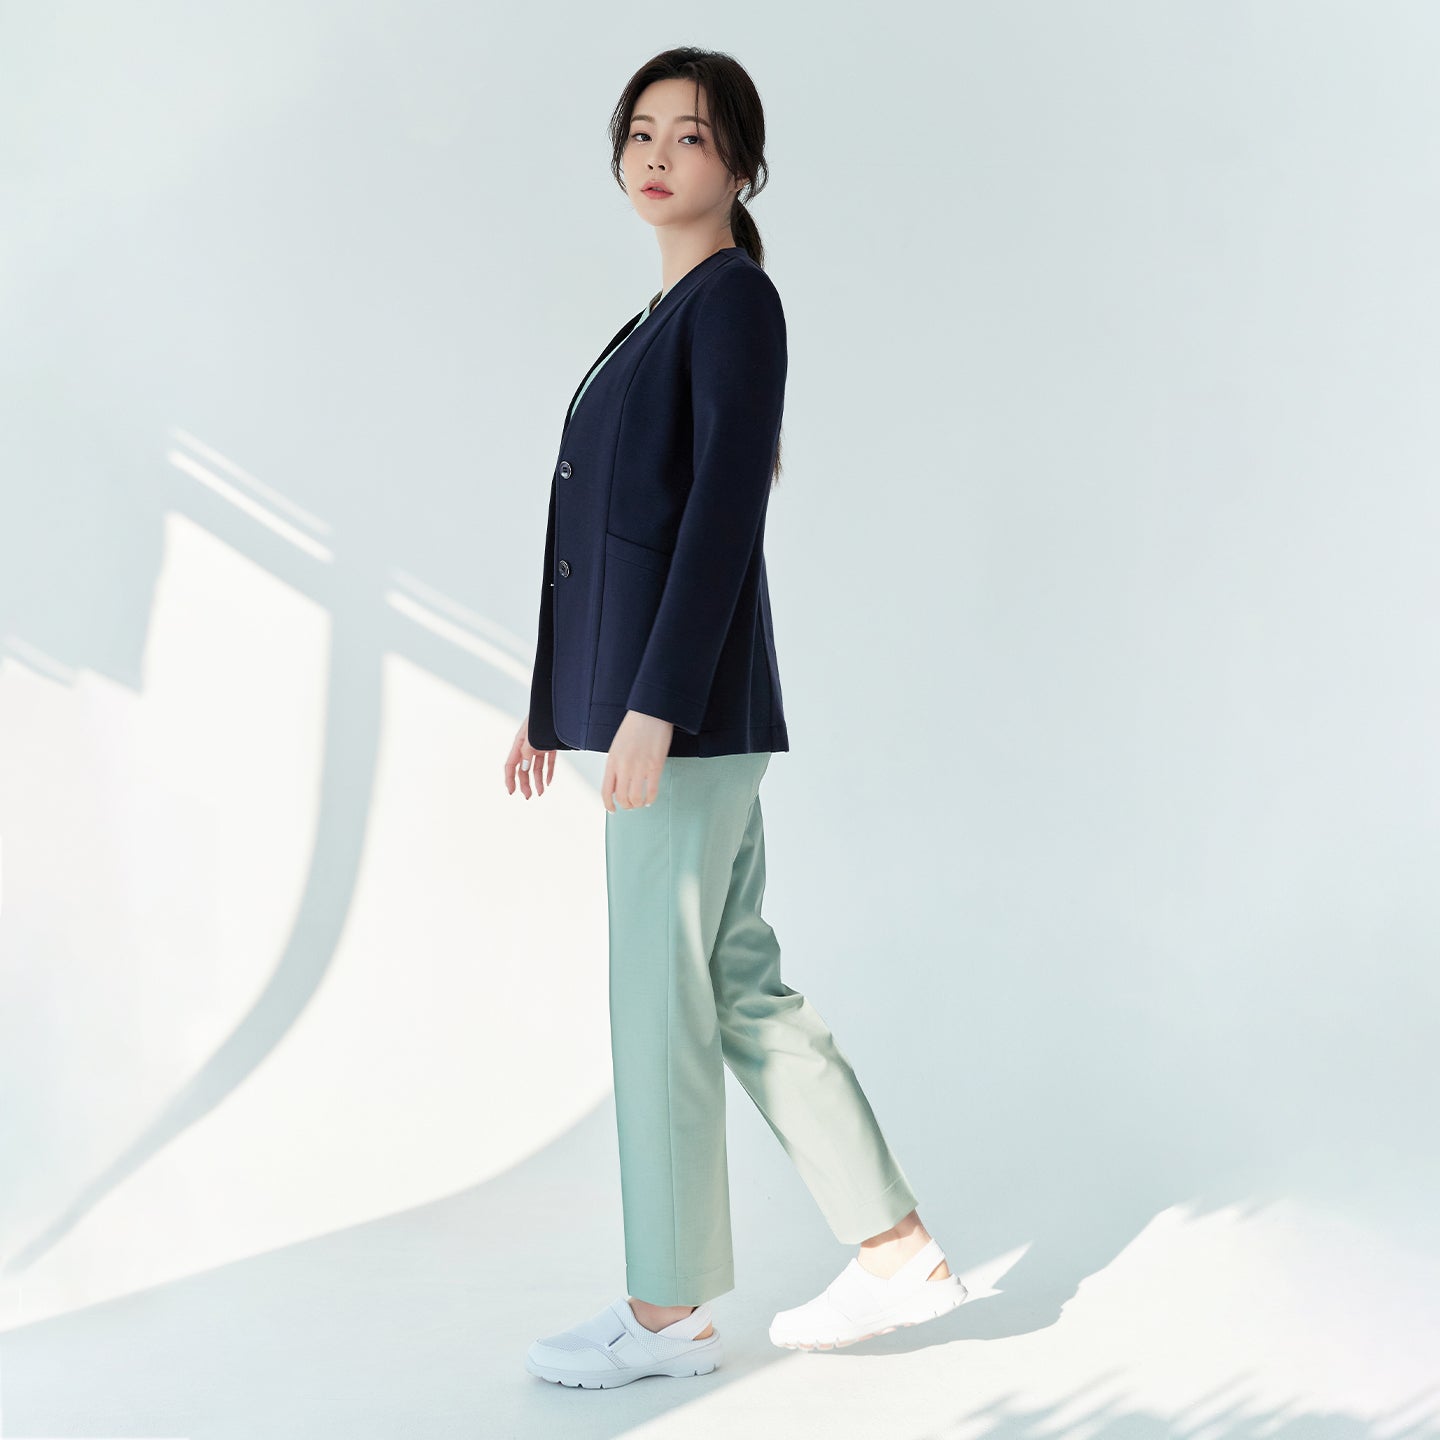 Woman in navy Zenir jacket over light green top and pants, standing and looking to the side, side view,Navy